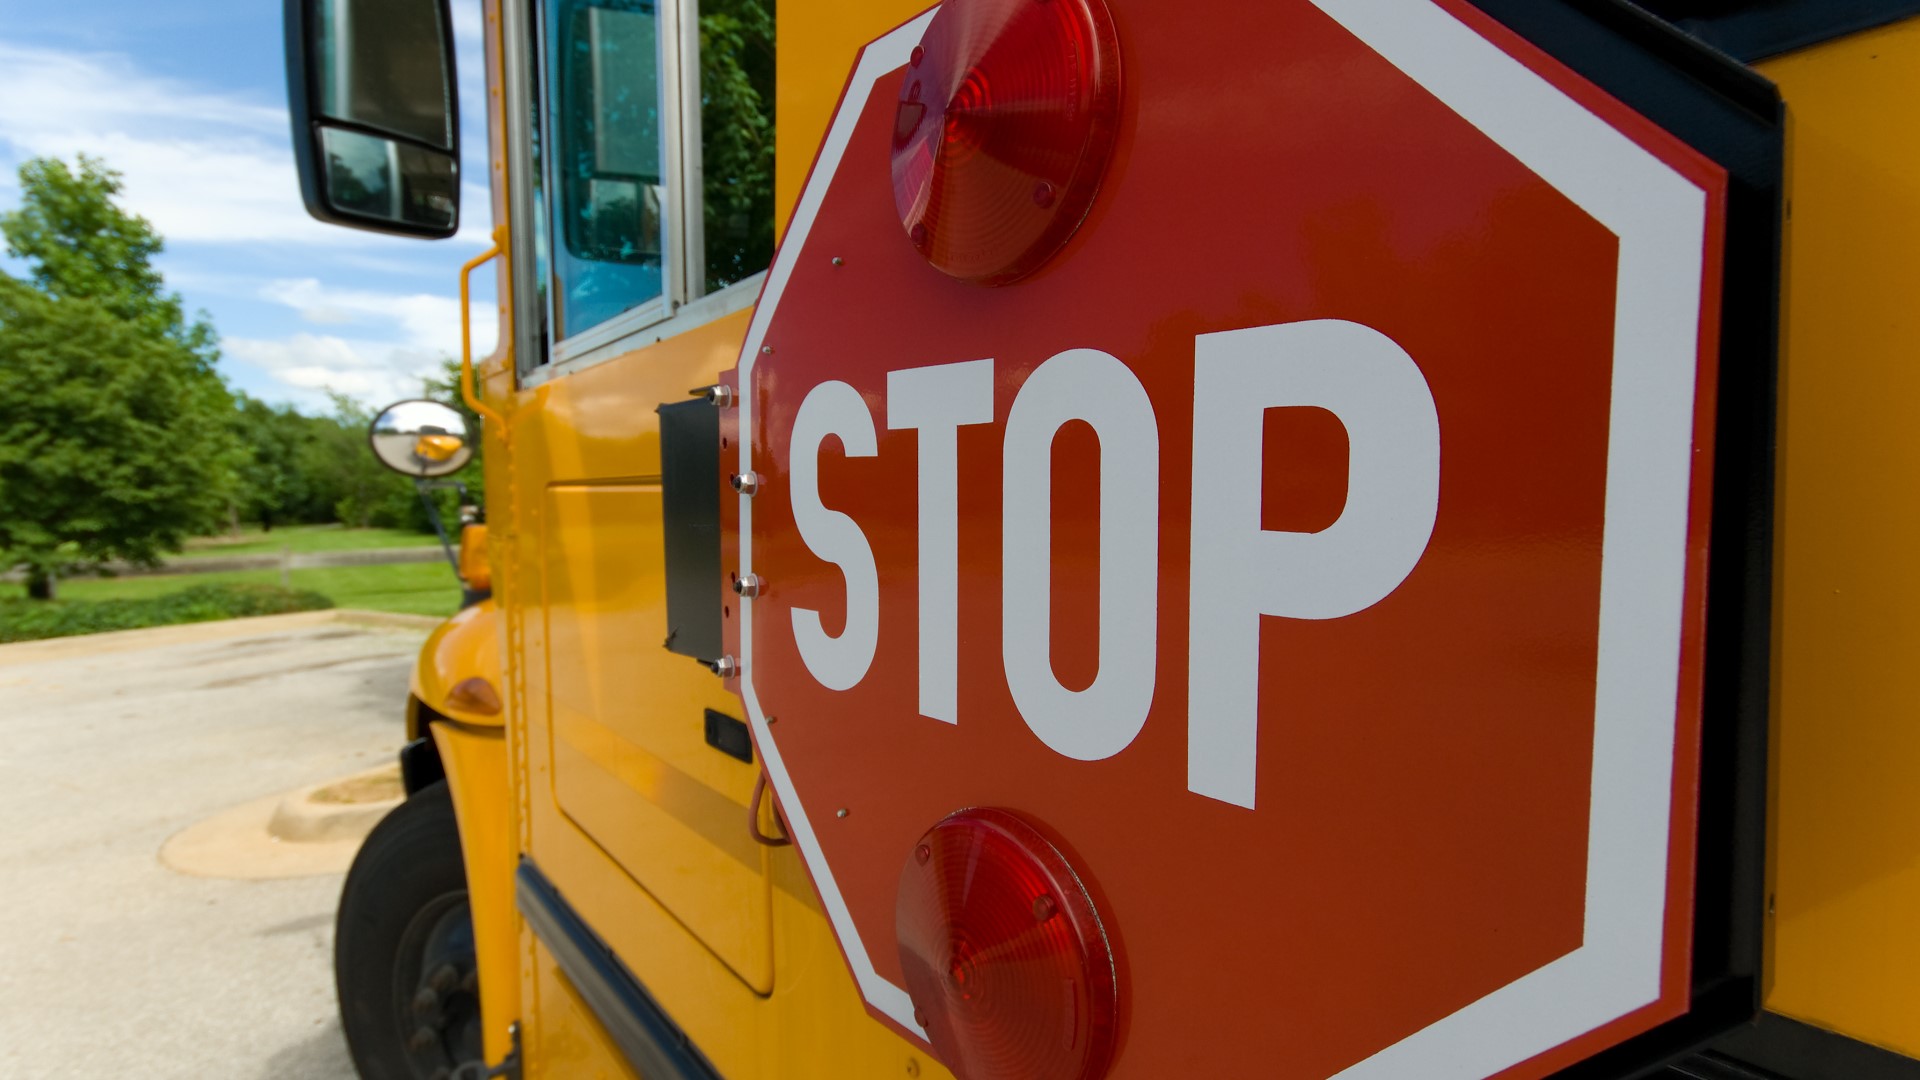 Charlotte-Mecklenburg Schools leaders are proposing a pay raise for bus drivers that would bring starting pay to $17.75 an hour.